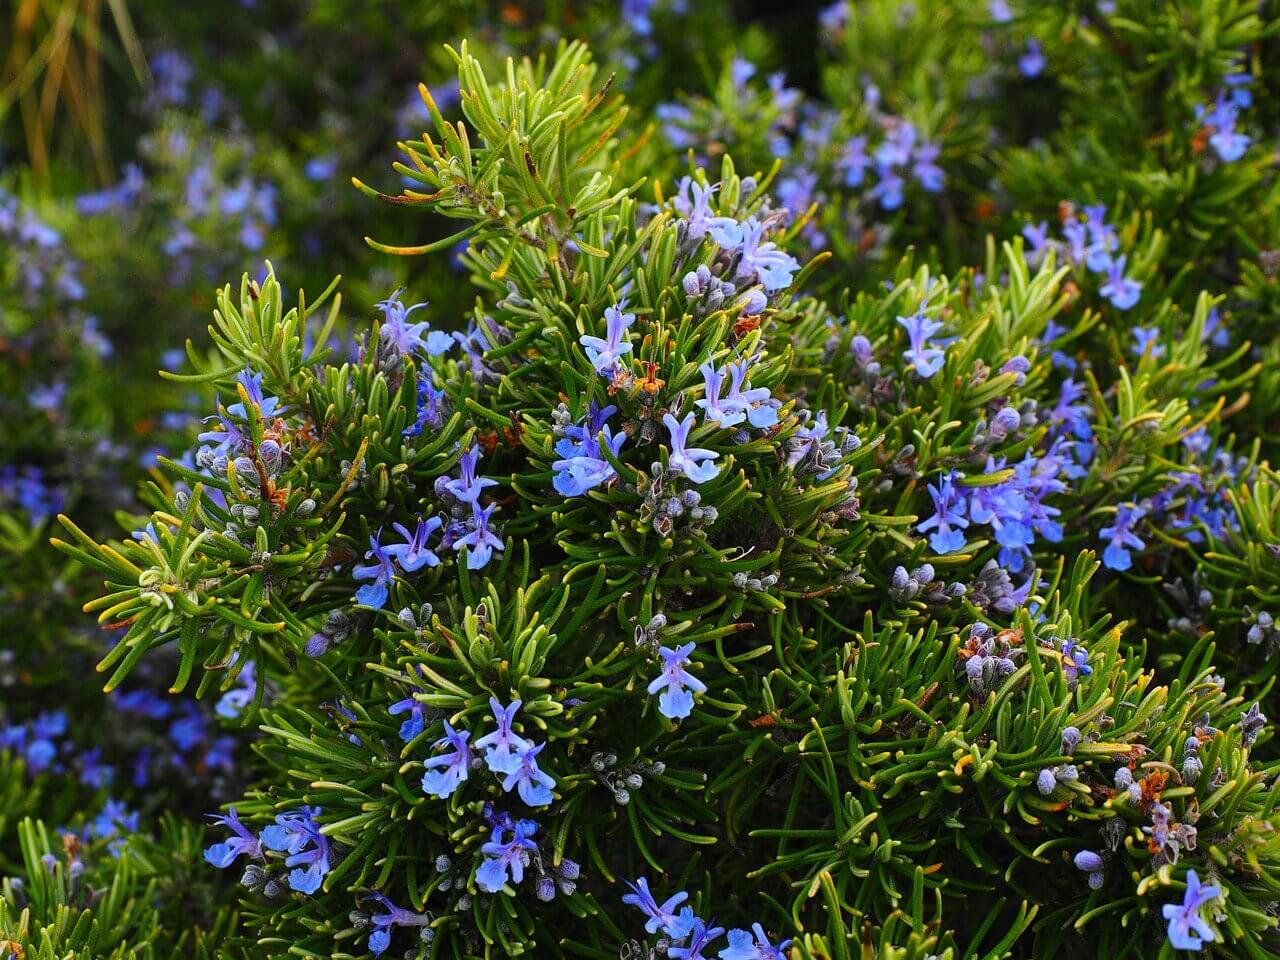 What Are The Different Types Of Rosemary?